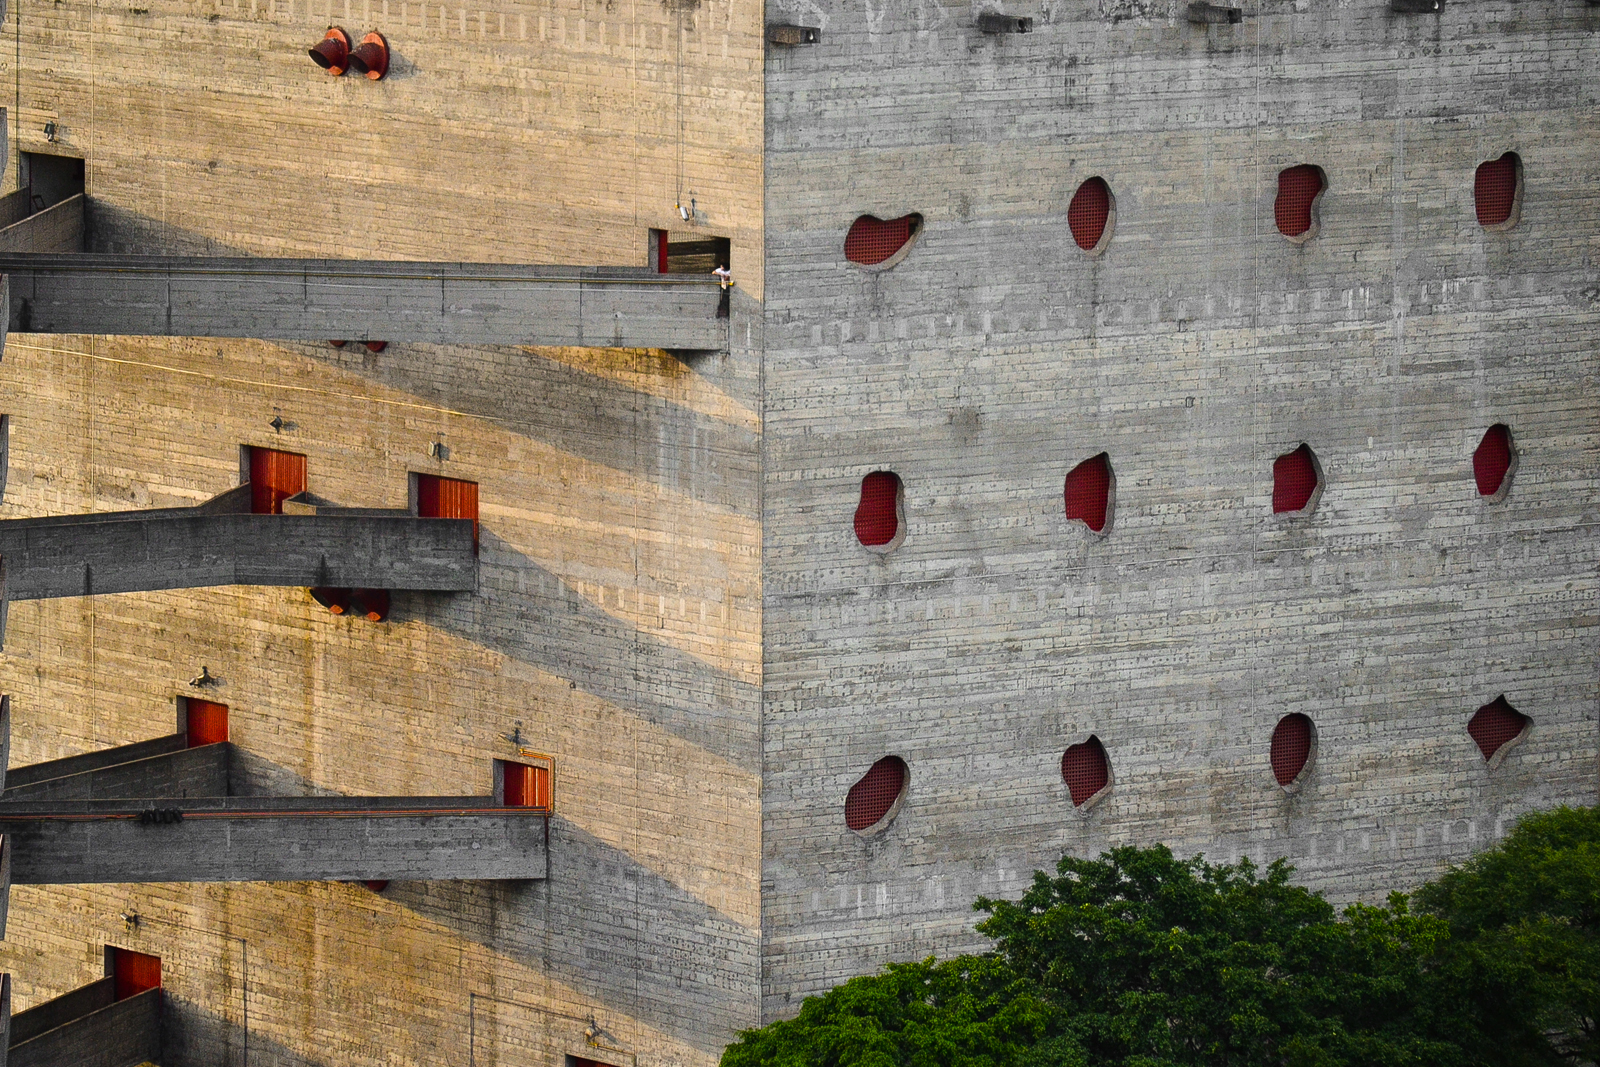 detail photograph showing the weathered concrete block construction, unusually shaped, red-gridded windows, and part of the split, angular skyways in the renovated SESC Pompeia factory